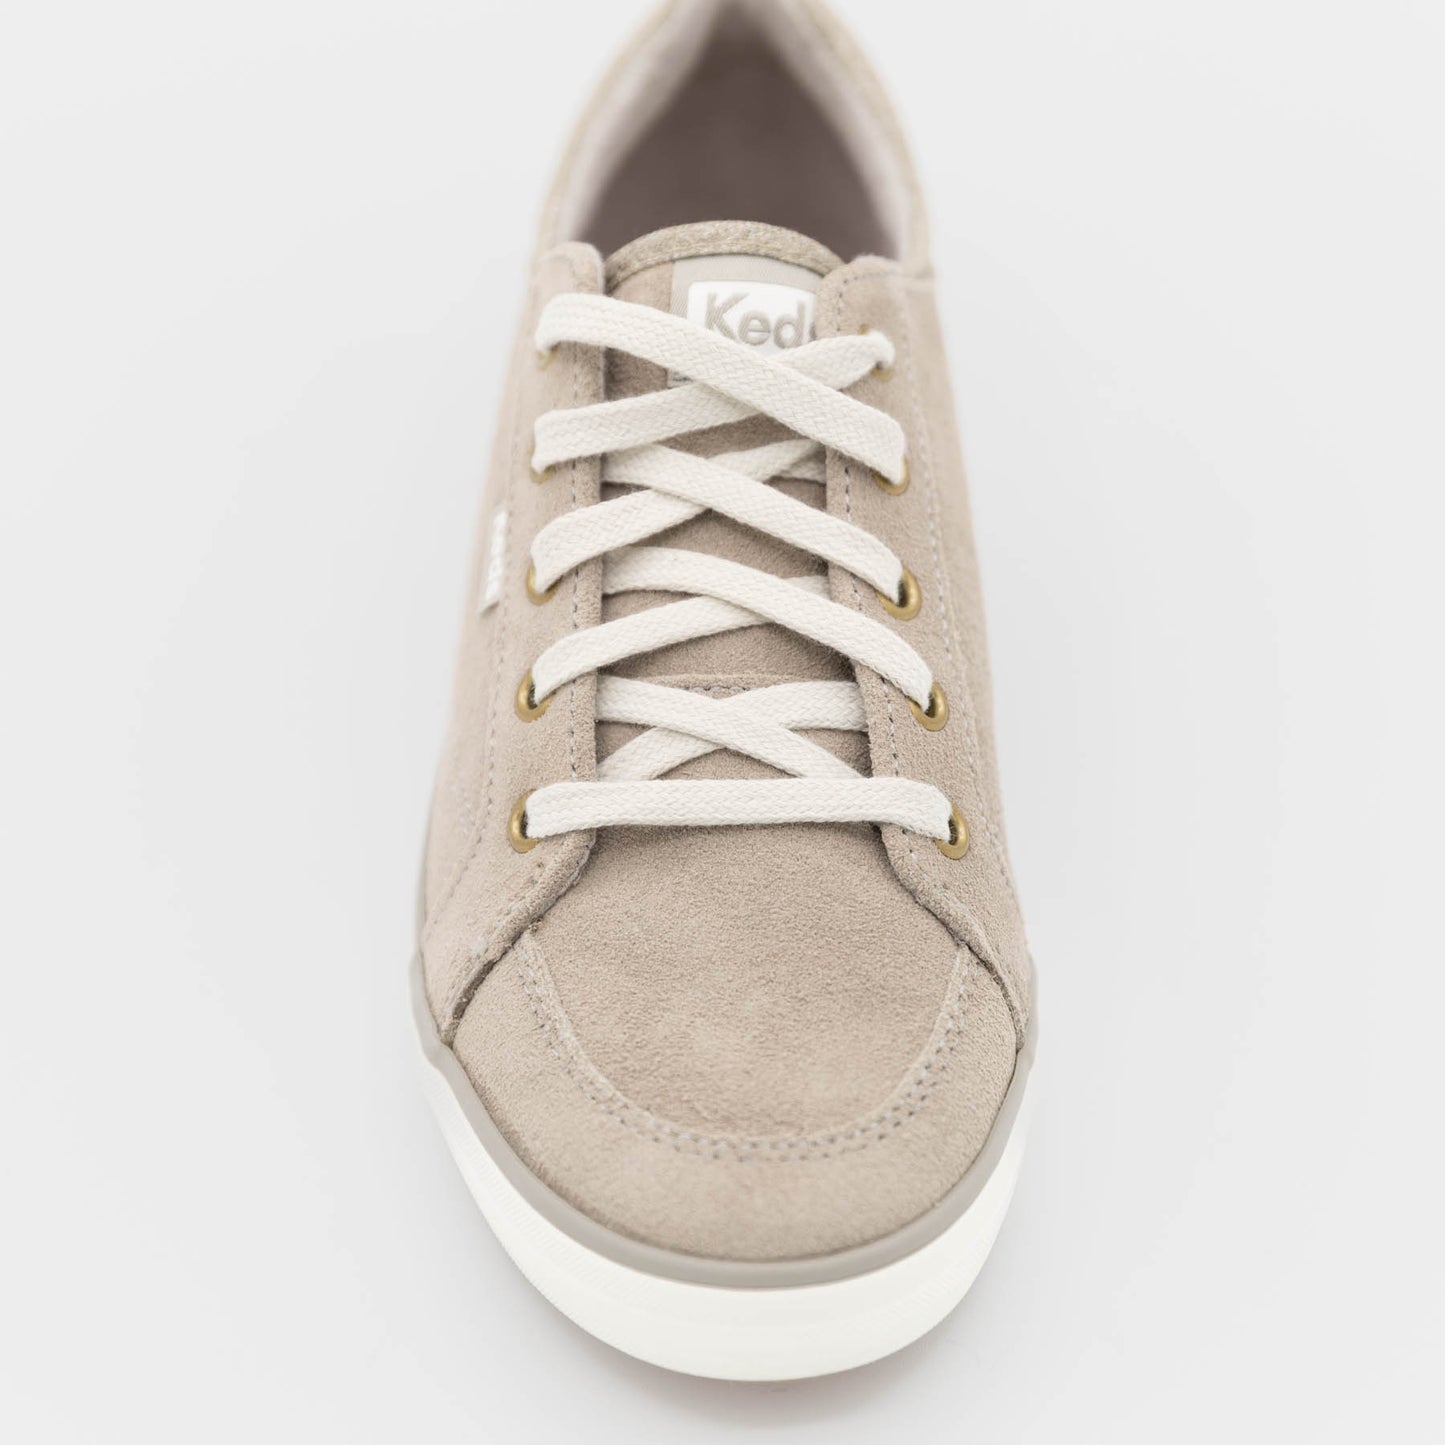 Keds - Center Ii Dove Gray Suede Lace Up Sneaker